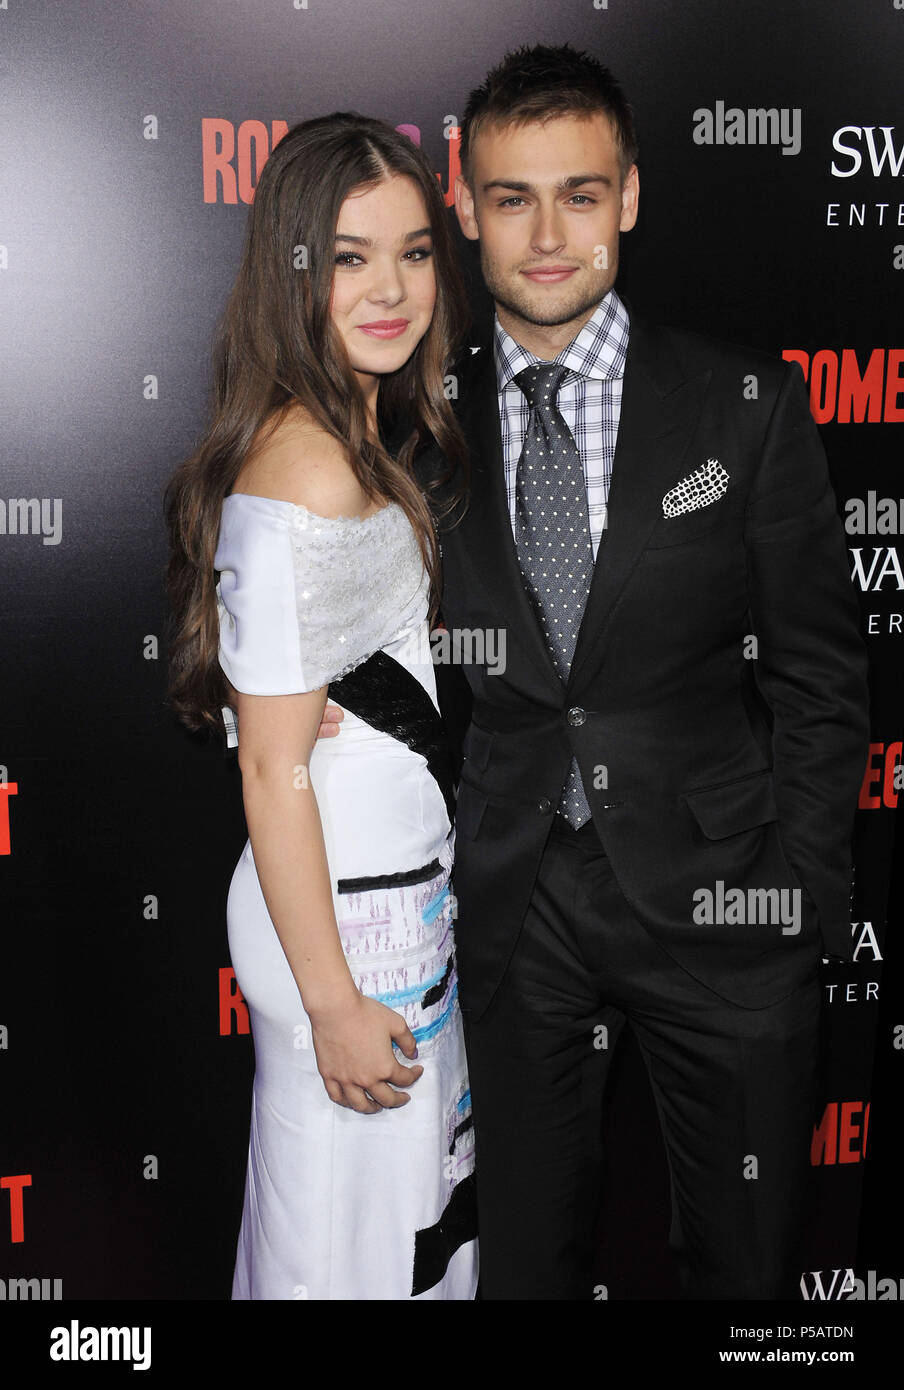 Hailee Steinfeld,  Douglas Booth  arriving at the Romeo & Juliet Premiere at the Arclight Theatre In Los Angeles.a  Hailee Steinfeld,  Douglas Booth 102 ------------- Red Carpet Event, Vertical, USA, Film Industry, Celebrities,  Photography, Bestof, Arts Culture and Entertainment, Topix Celebrities fashion /  Vertical, Best of, Event in Hollywood Life - California,  Red Carpet and backstage, USA, Film Industry, Celebrities,  movie celebrities, TV celebrities, Music celebrities, Photography, Bestof, Arts Culture and Entertainment,  Topix, vertical,  family from from the year , 2013, inquiry tsu Stock Photo